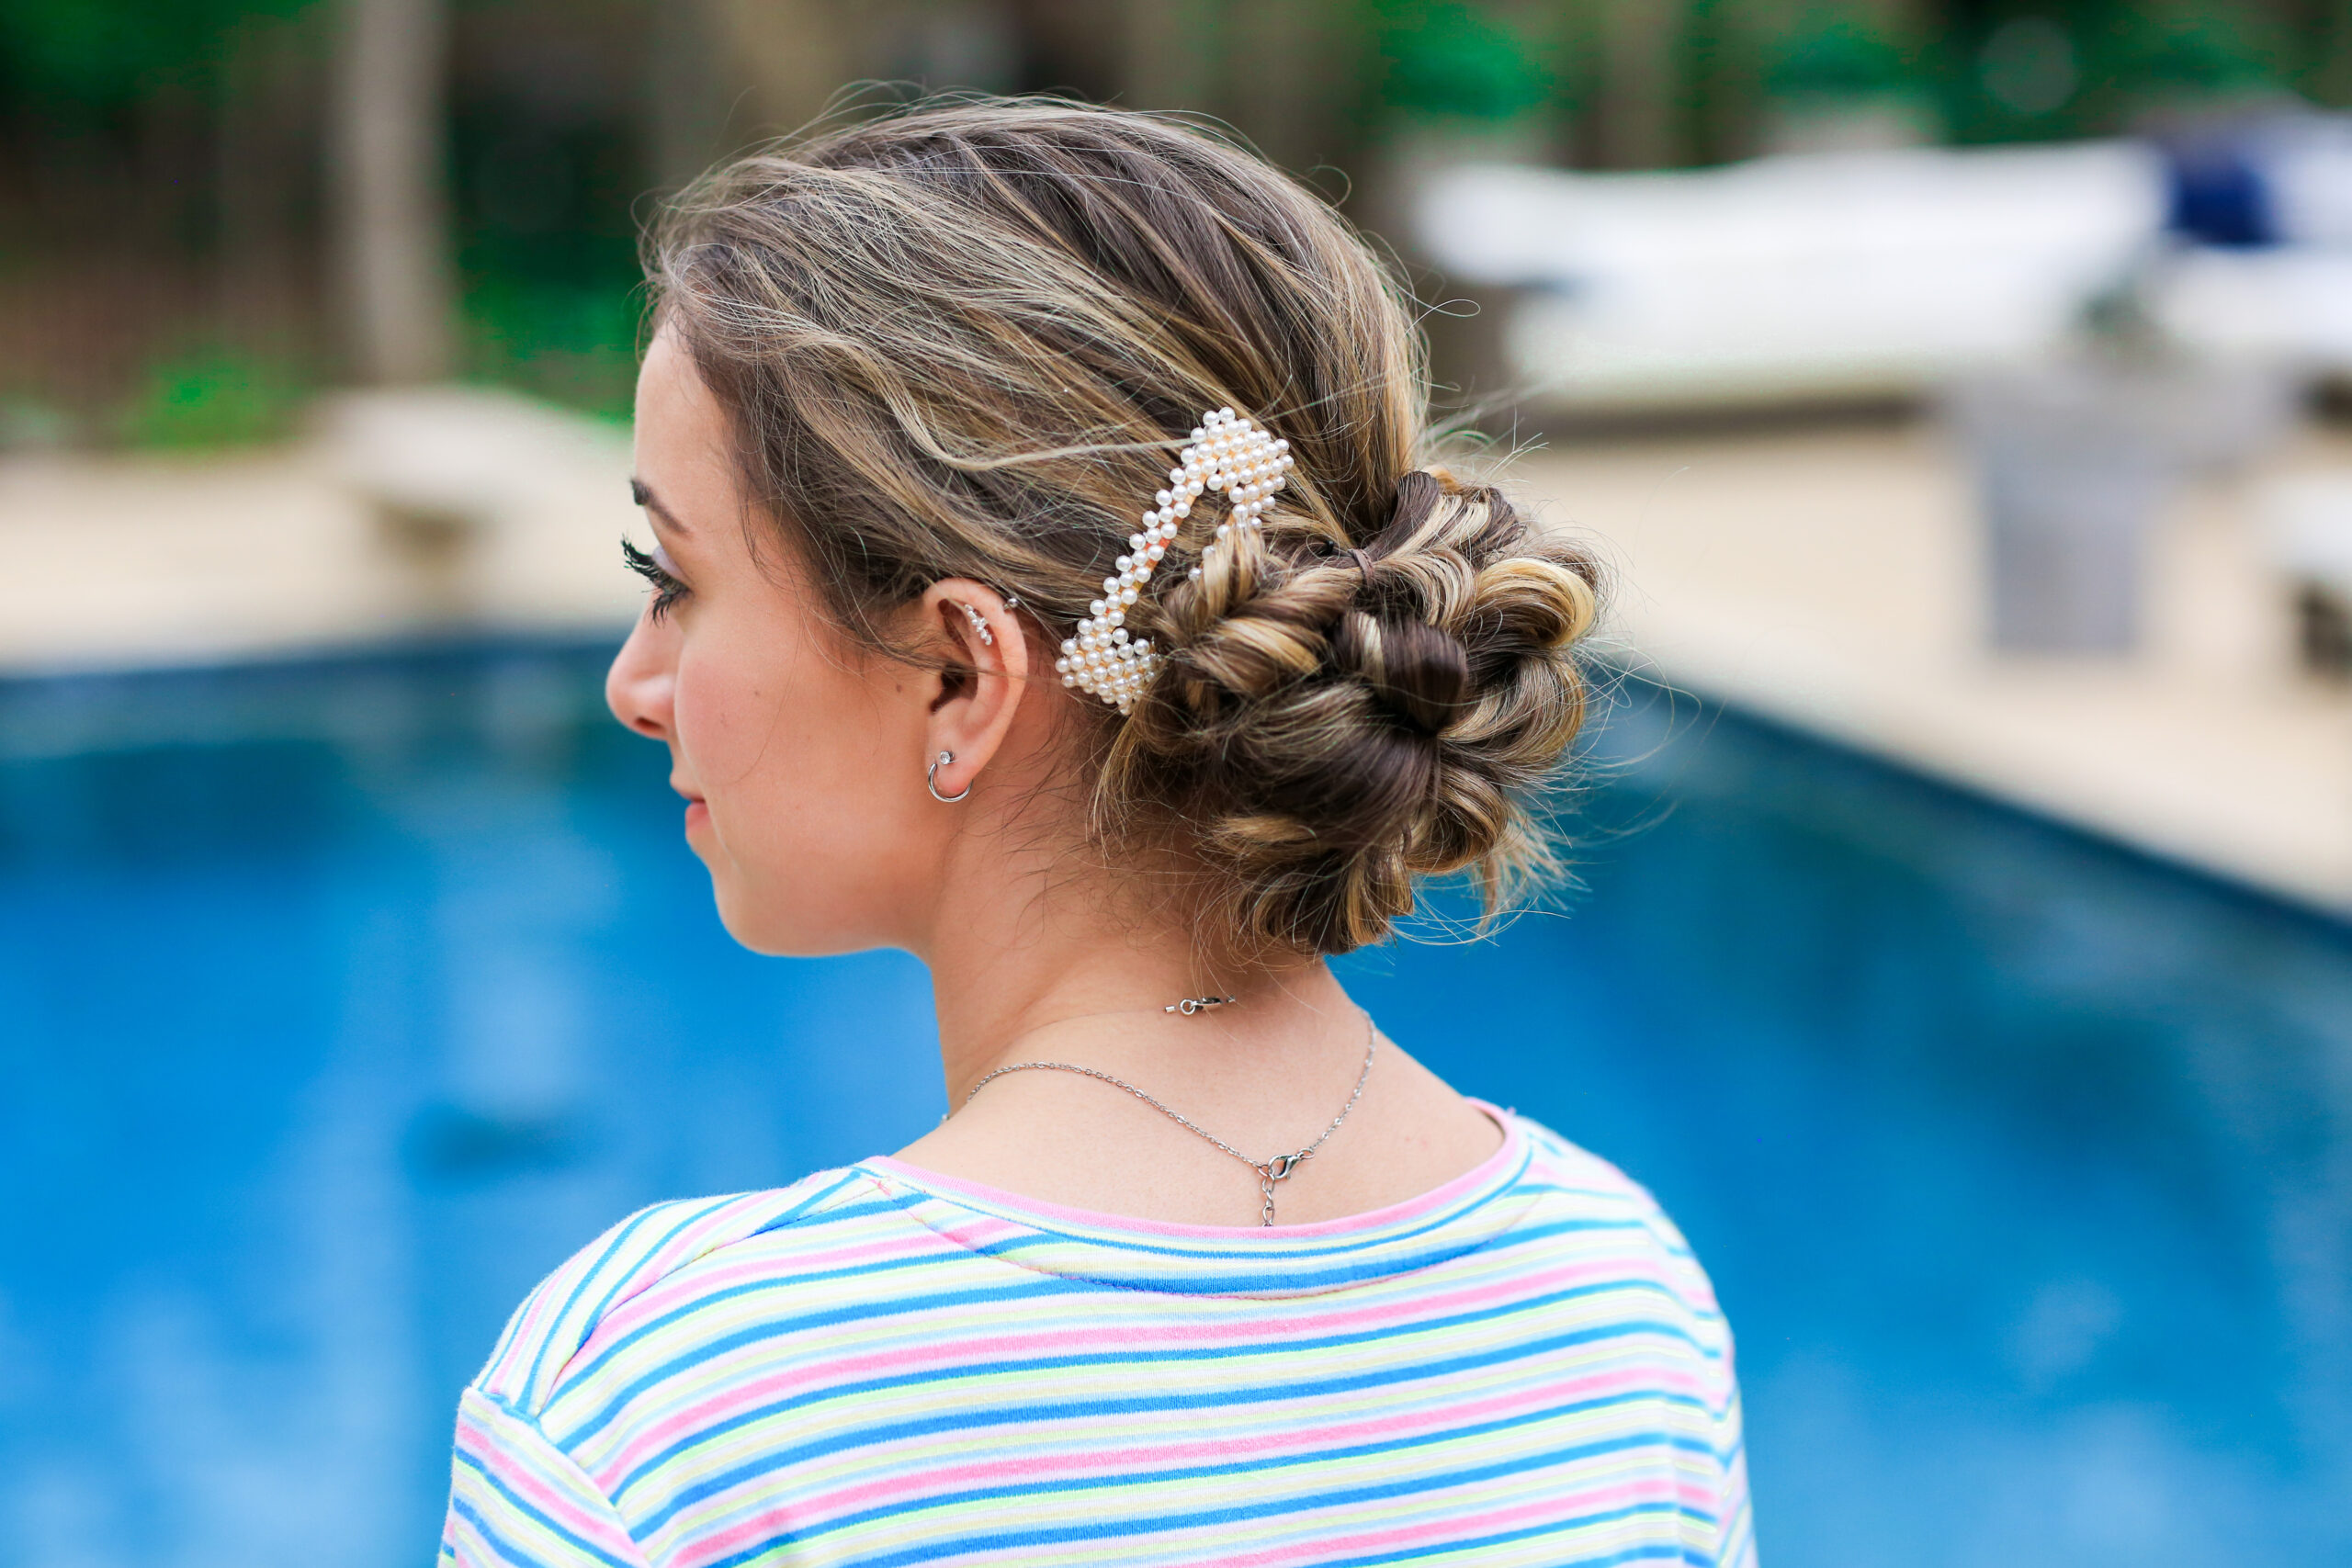 Hairstyles for College Girls